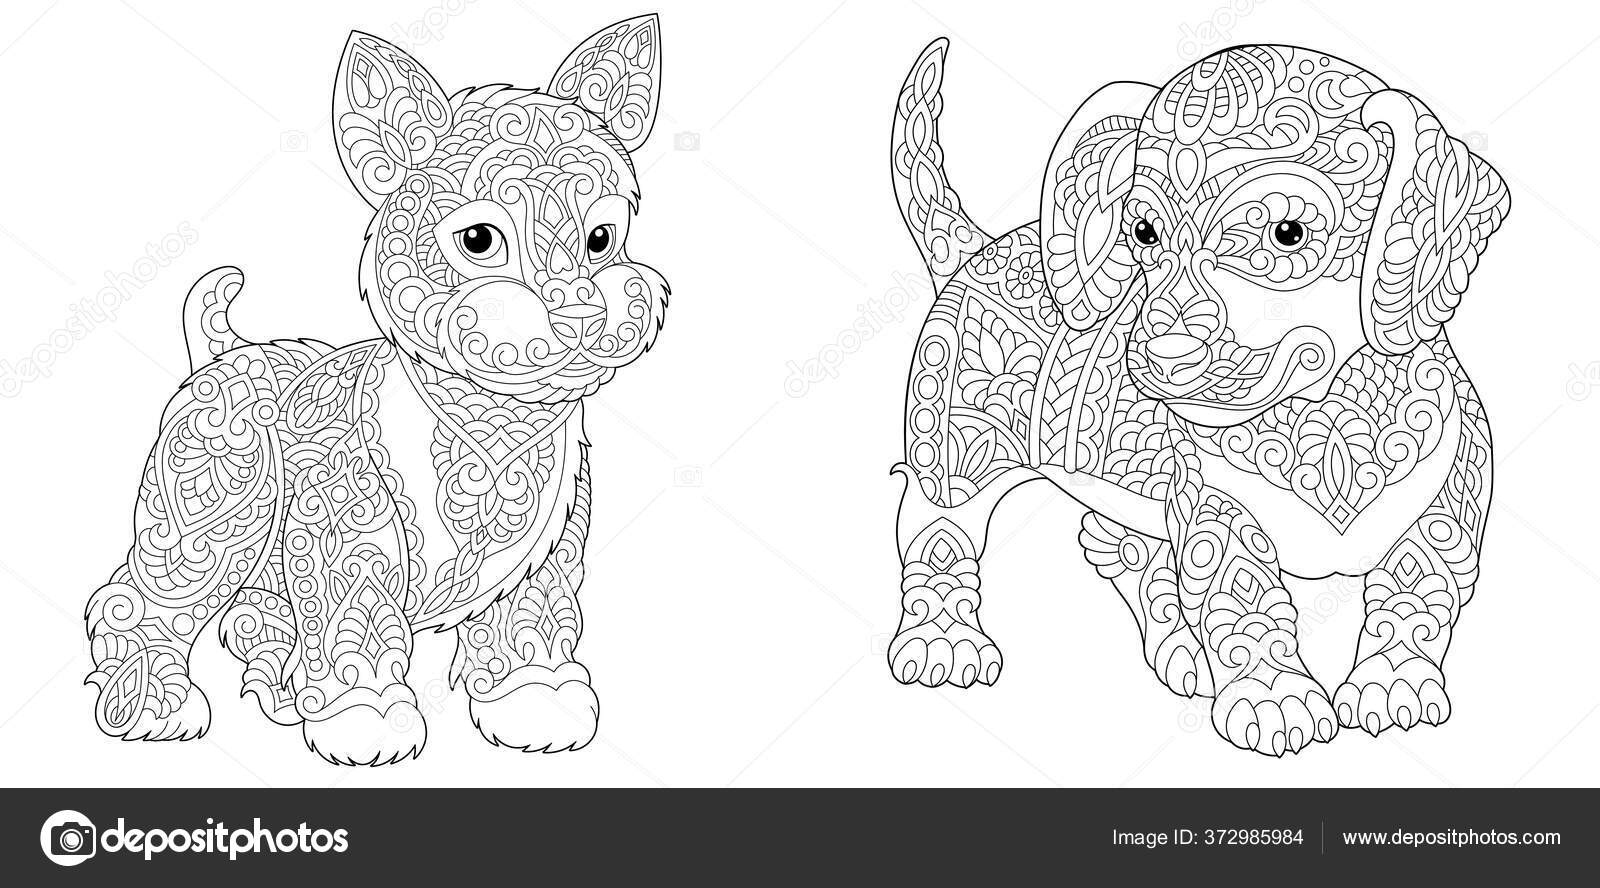 Animal coloring pages cute yorkshire terrier dachshund line art design stock vector by sybirko